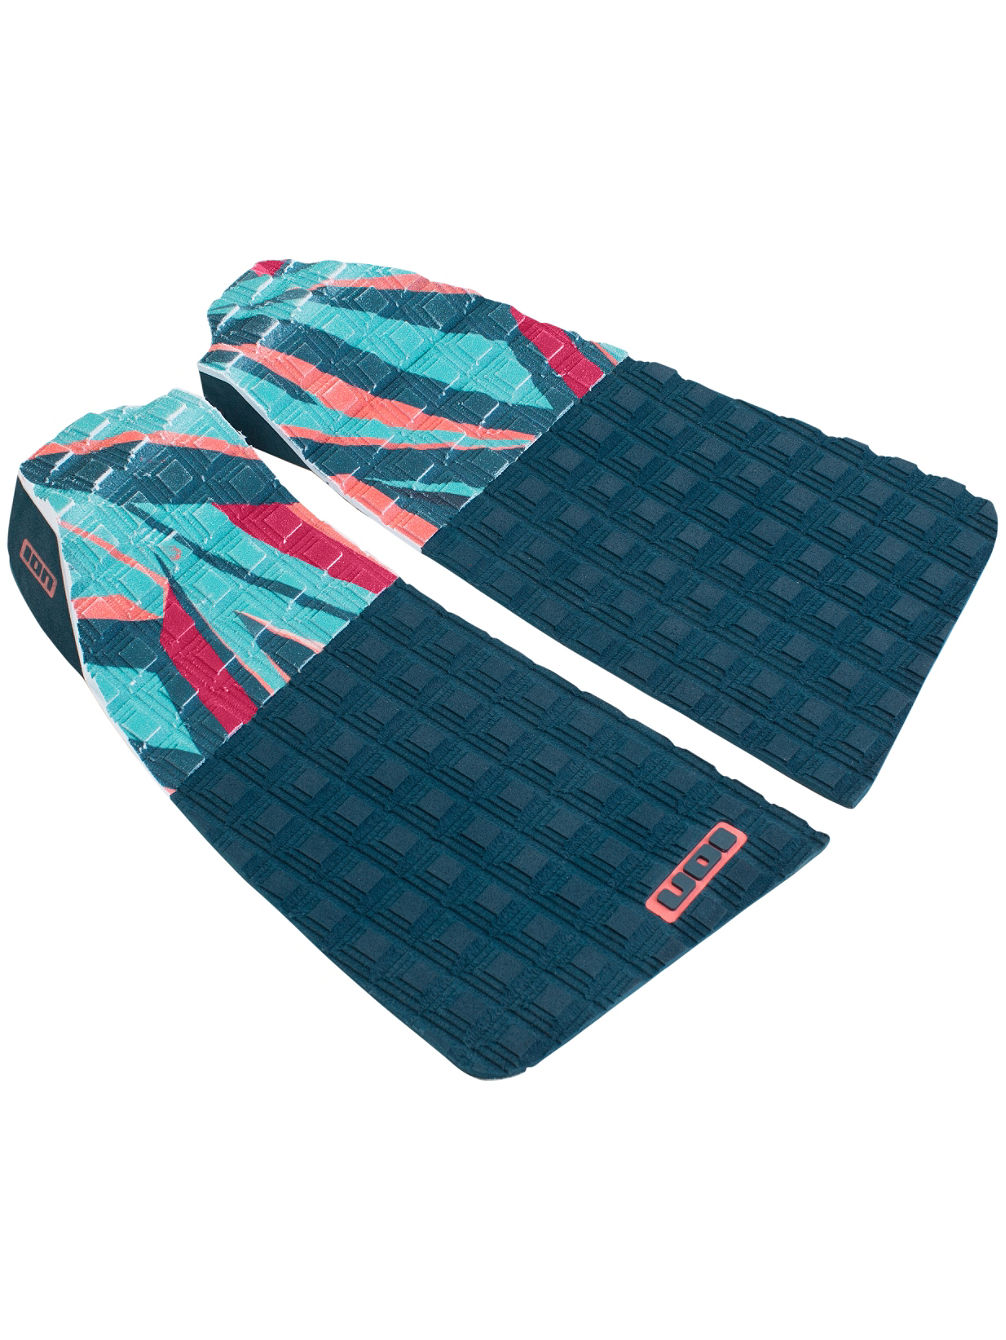 Muse (2Pcs) Traction Tail Pad